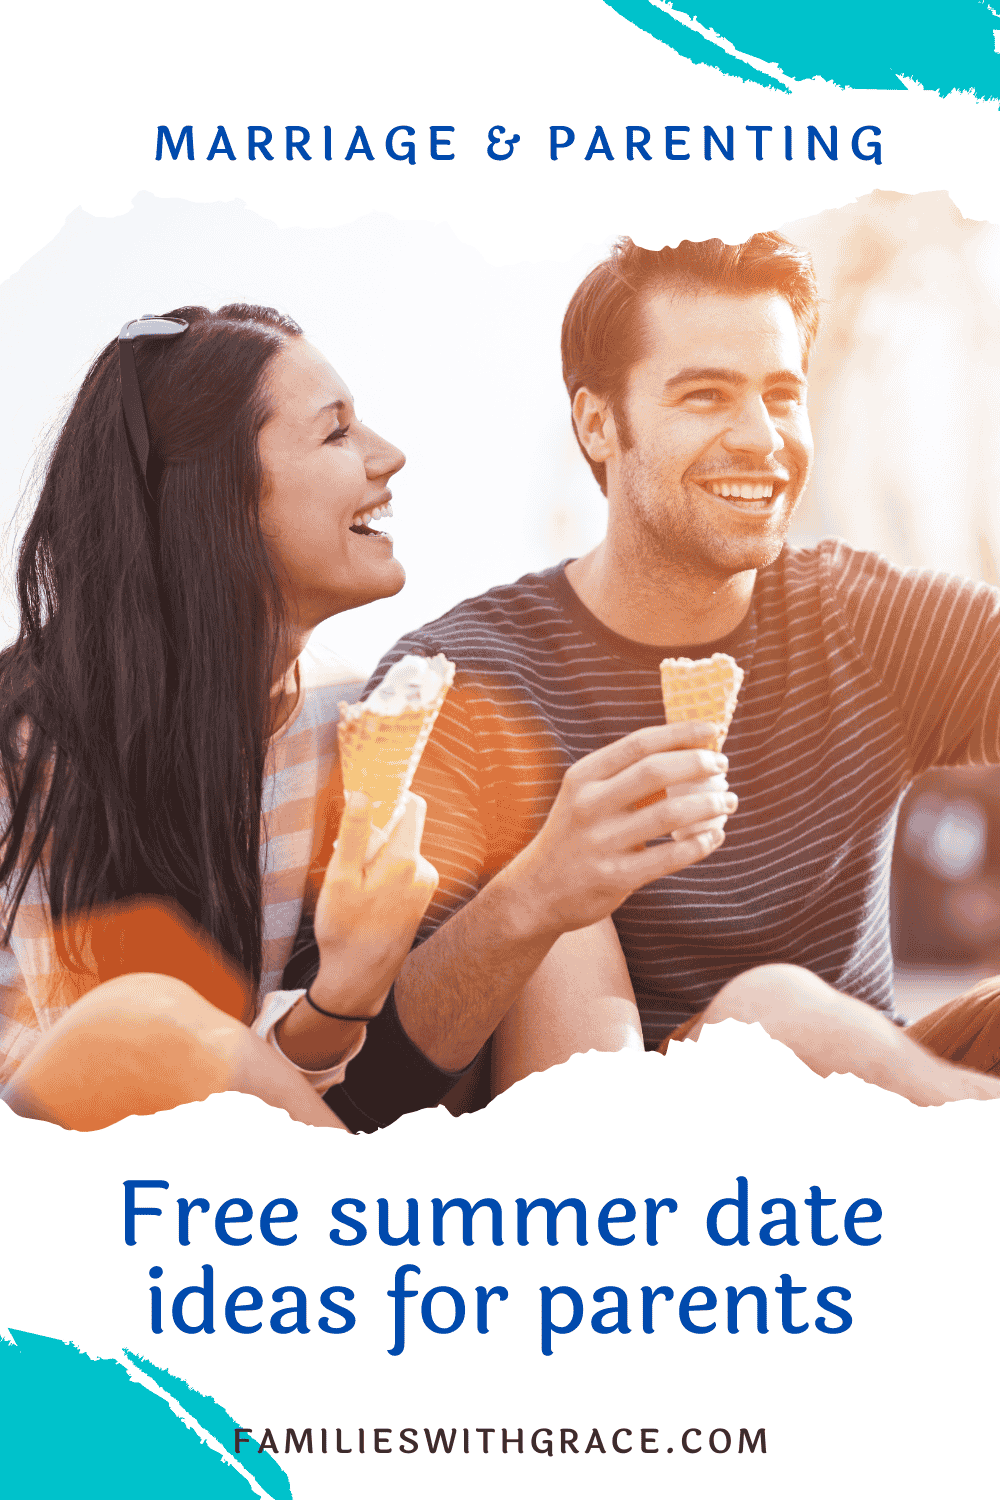 Free summer date ideas for parents